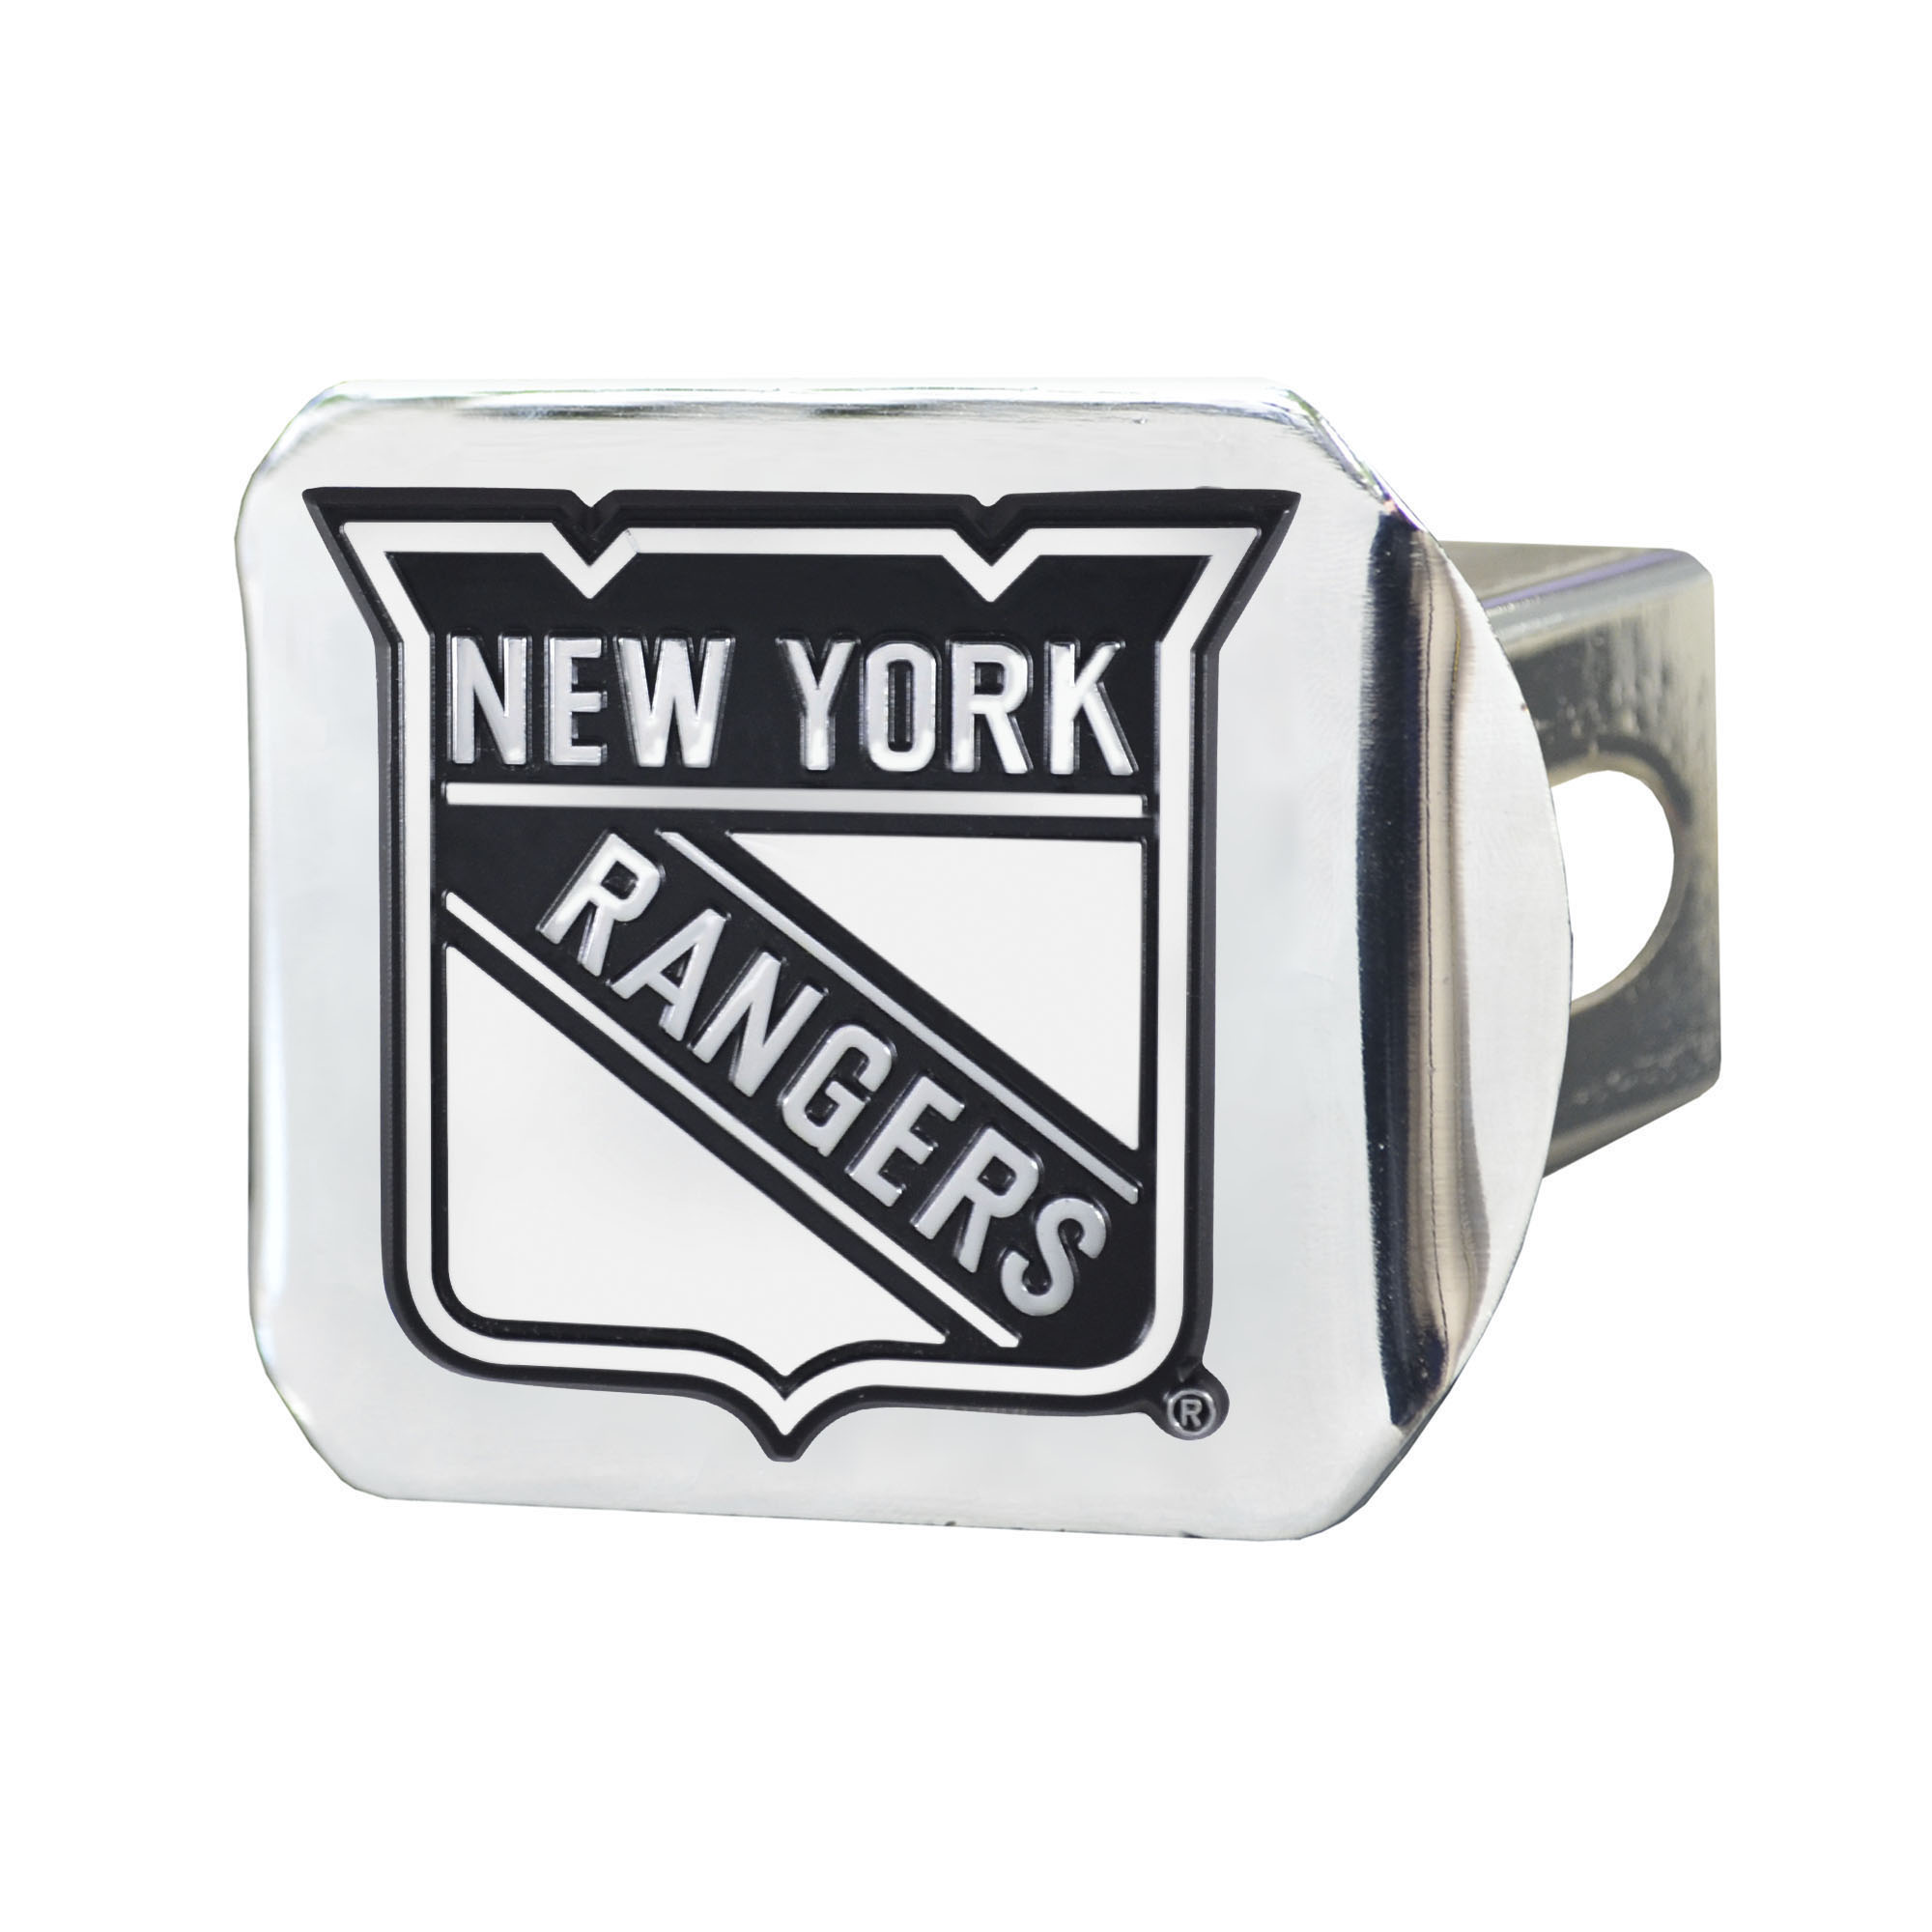 Fanmats NHL - New York Rangers Hitch Cover - 17168 - image 1 of 5